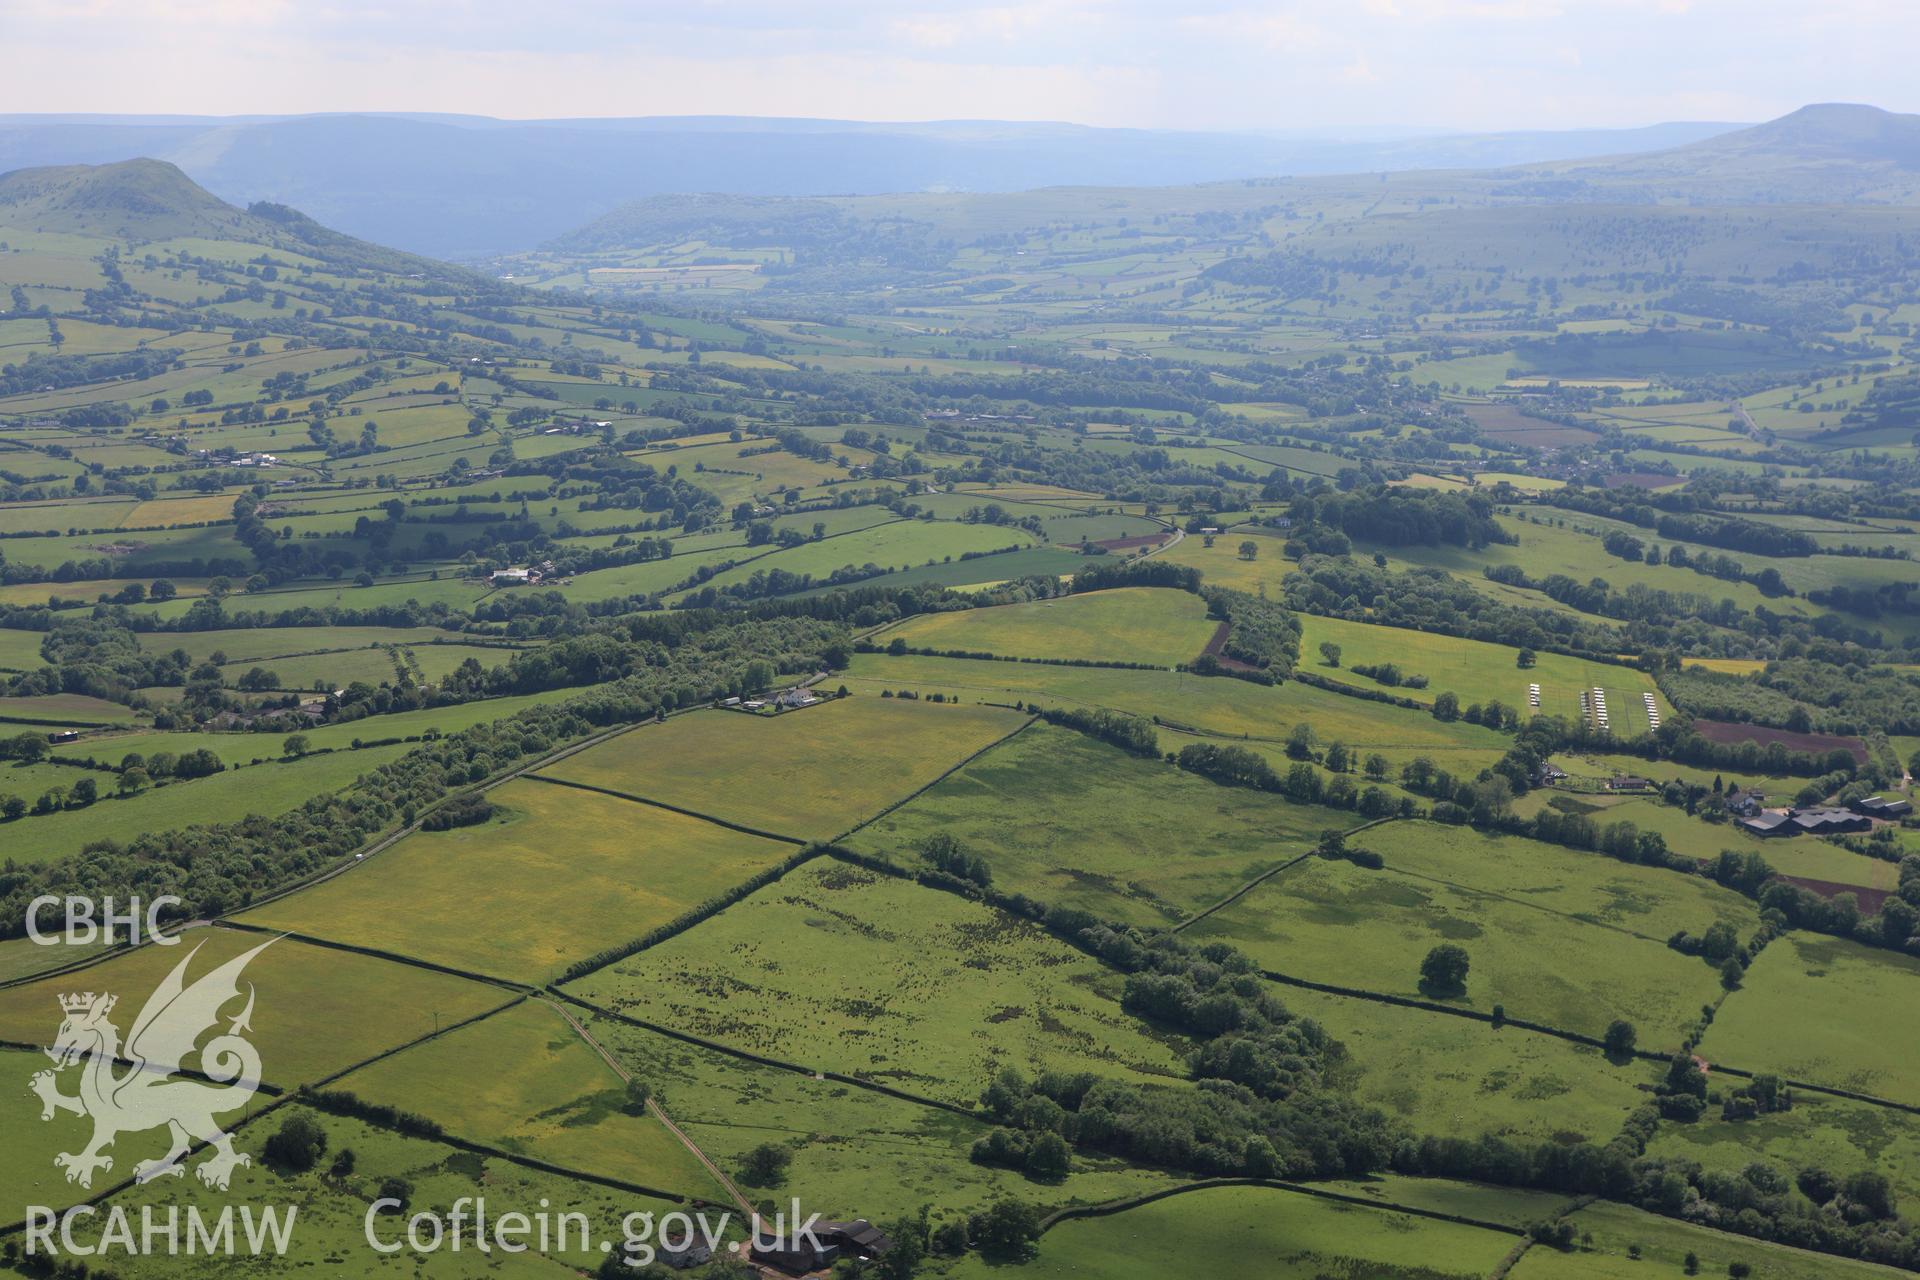 RCAHMW colour oblique aerial photograph of Campston Hill, near Llangattock Lingoed. Taken on 11 June 2009 by Toby Driver